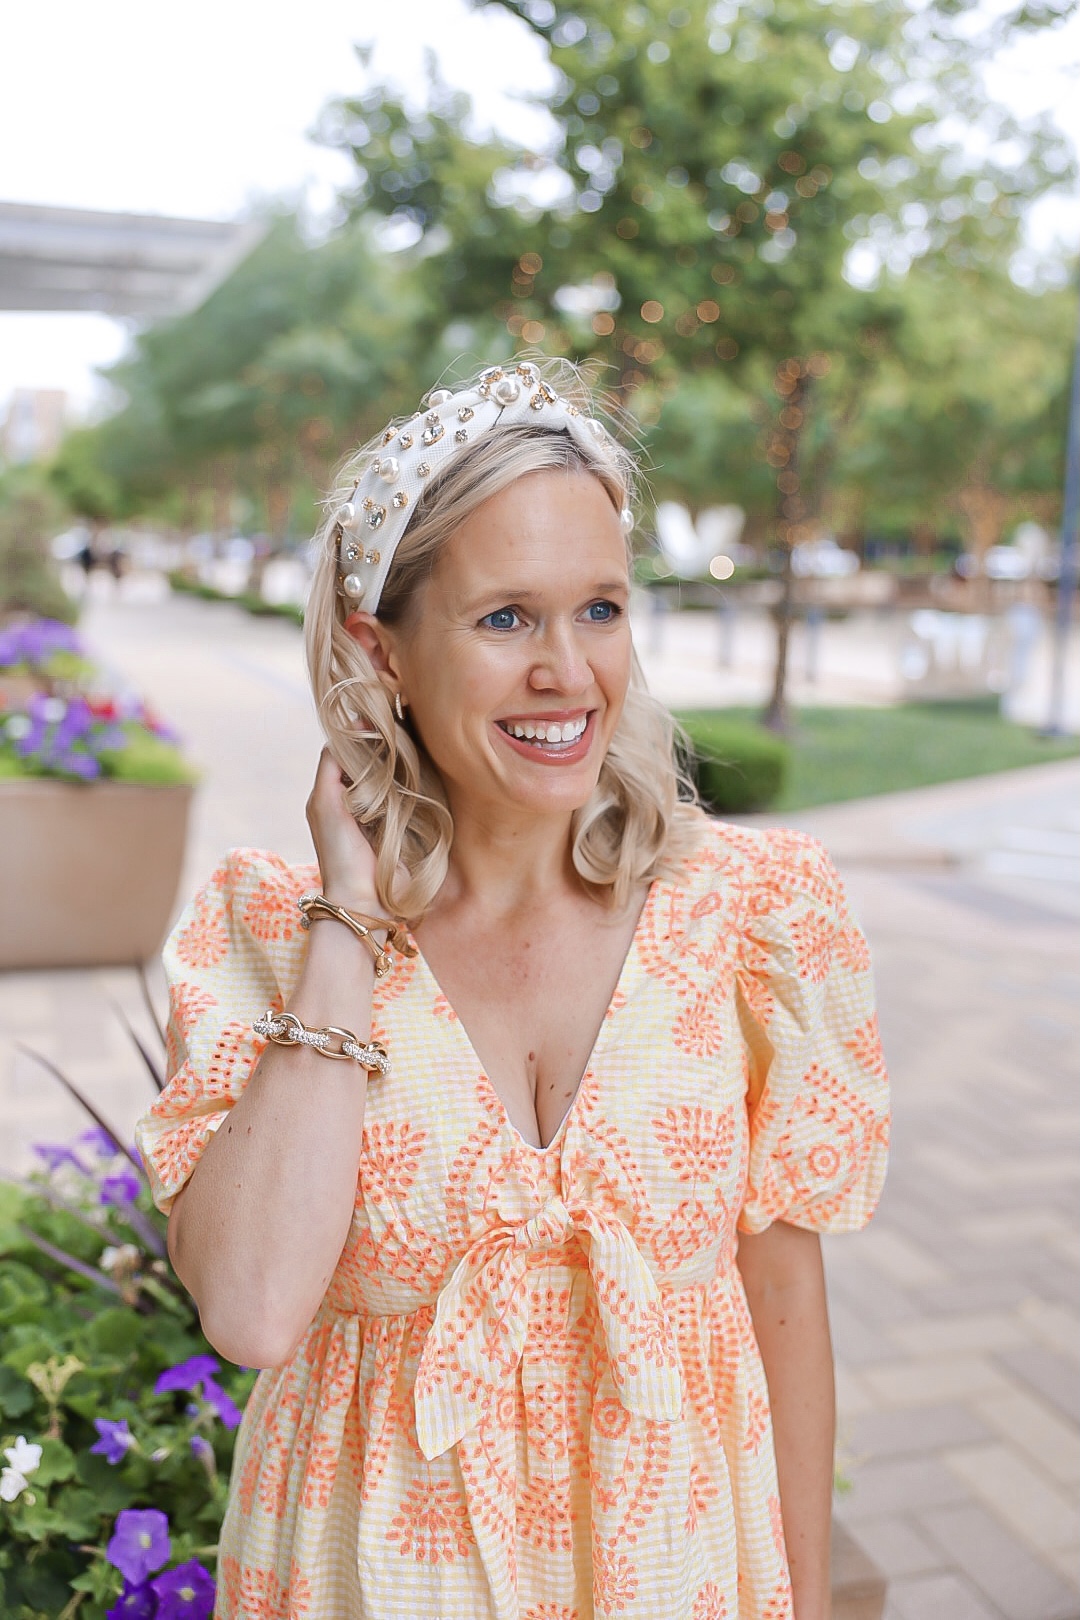 lilly pulitzer dress with white headband from Brianna Cannon